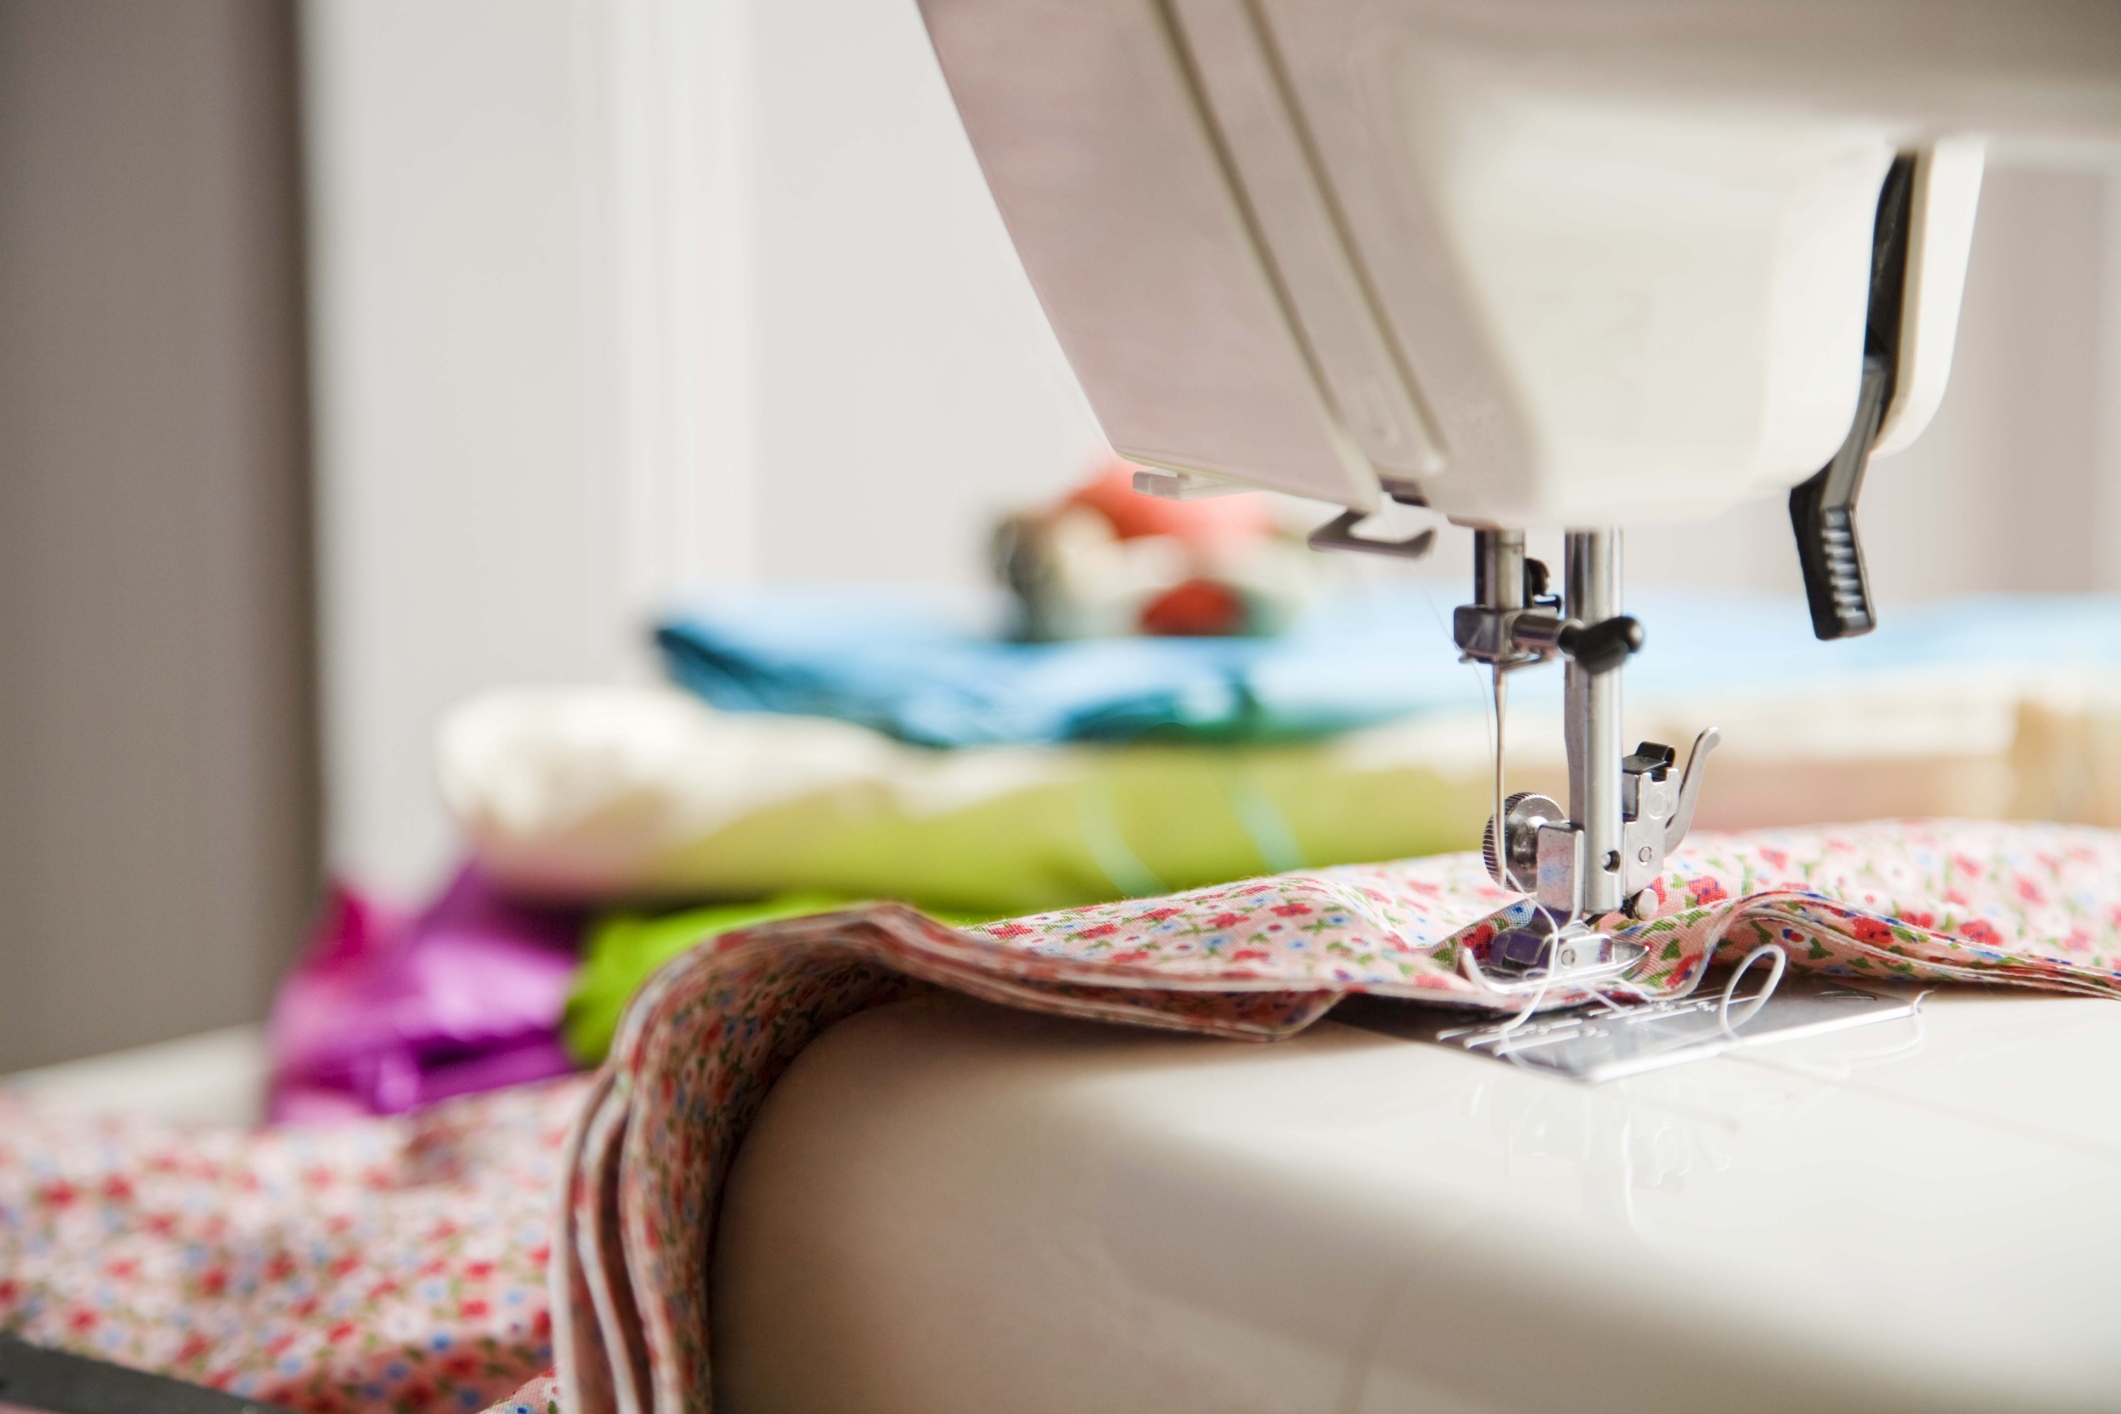 Tools and Equipment in Sewing 